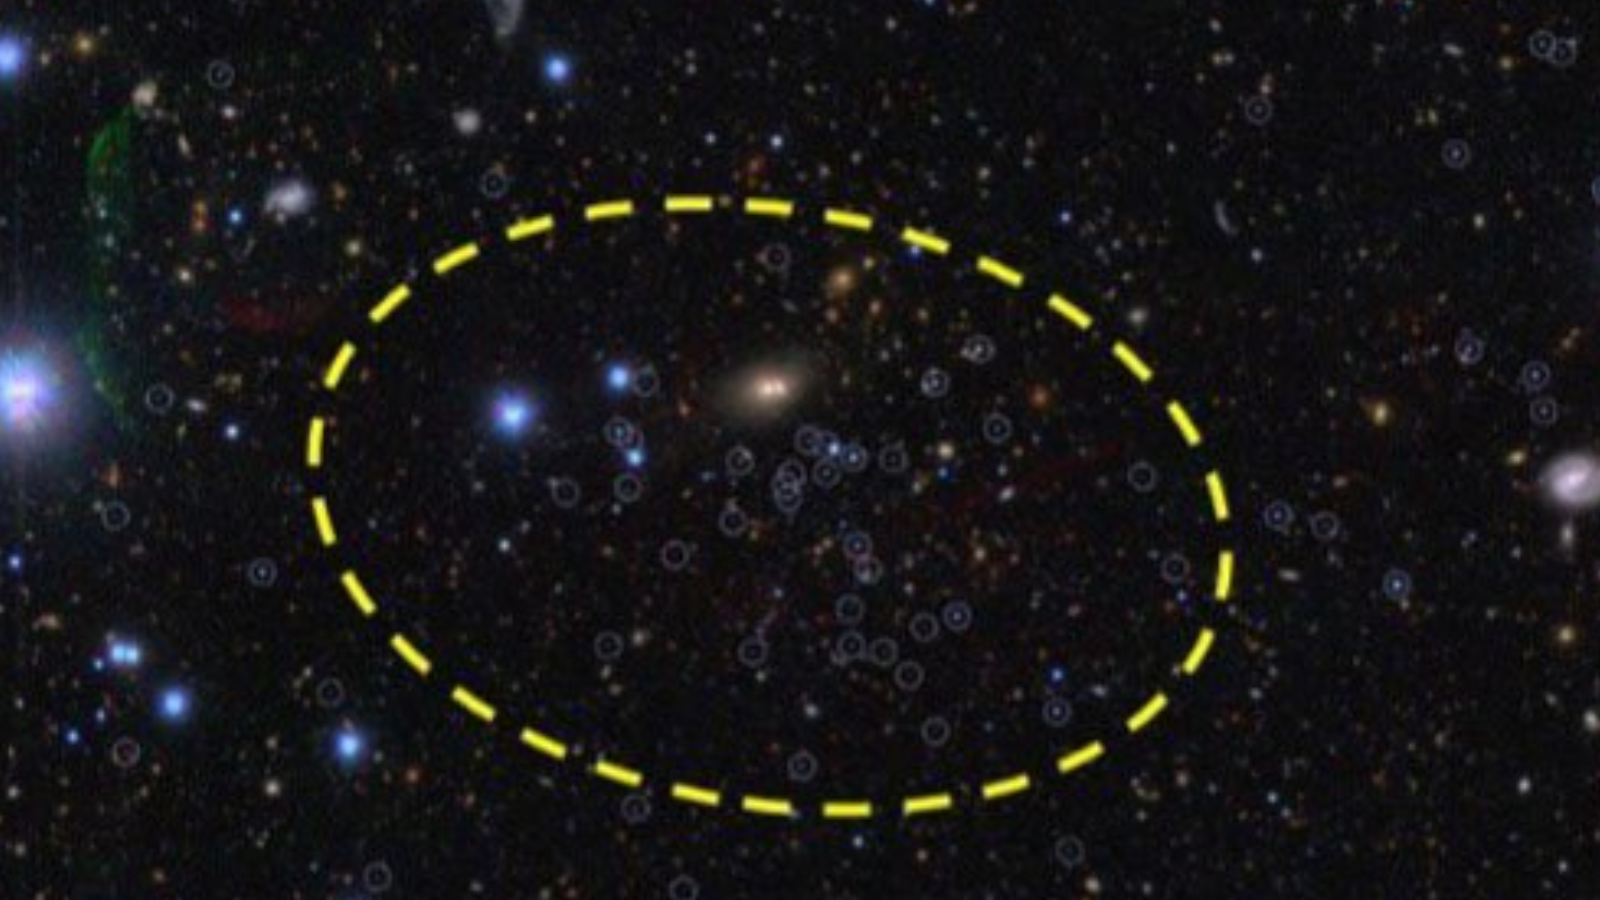 Scientists finally found 2 of the Milky Way’s missing dwarf galaxies. What could this mean for astronomy? Space